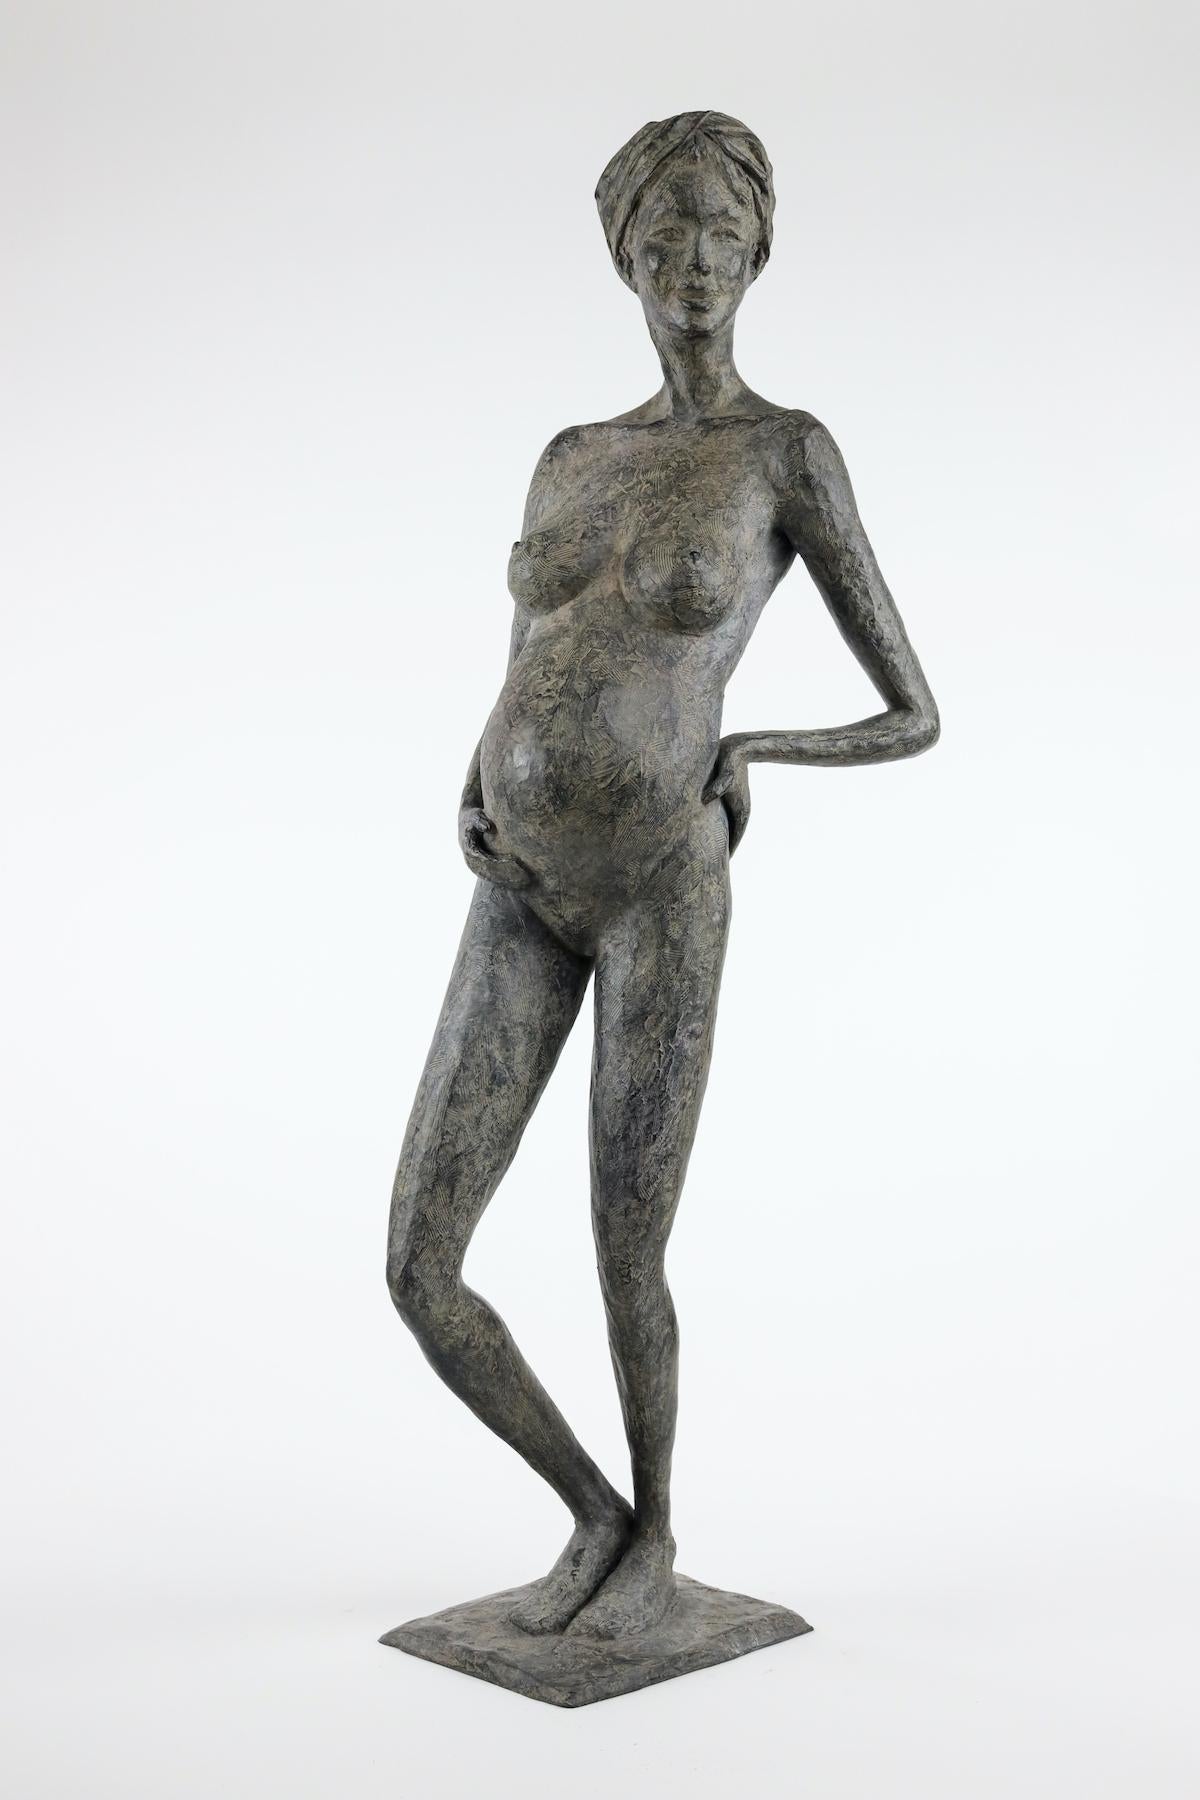 In Majesty is a bronze sculpture by French contemporary artist Marine de Soos, dimensions are 87 × 33 × 22 cm (34.3 × 13 × 8.7 in). 
The sculpture is signed and numbered, it is part of a limited edition of 8 editions + 4 artist’s proofs, and comes